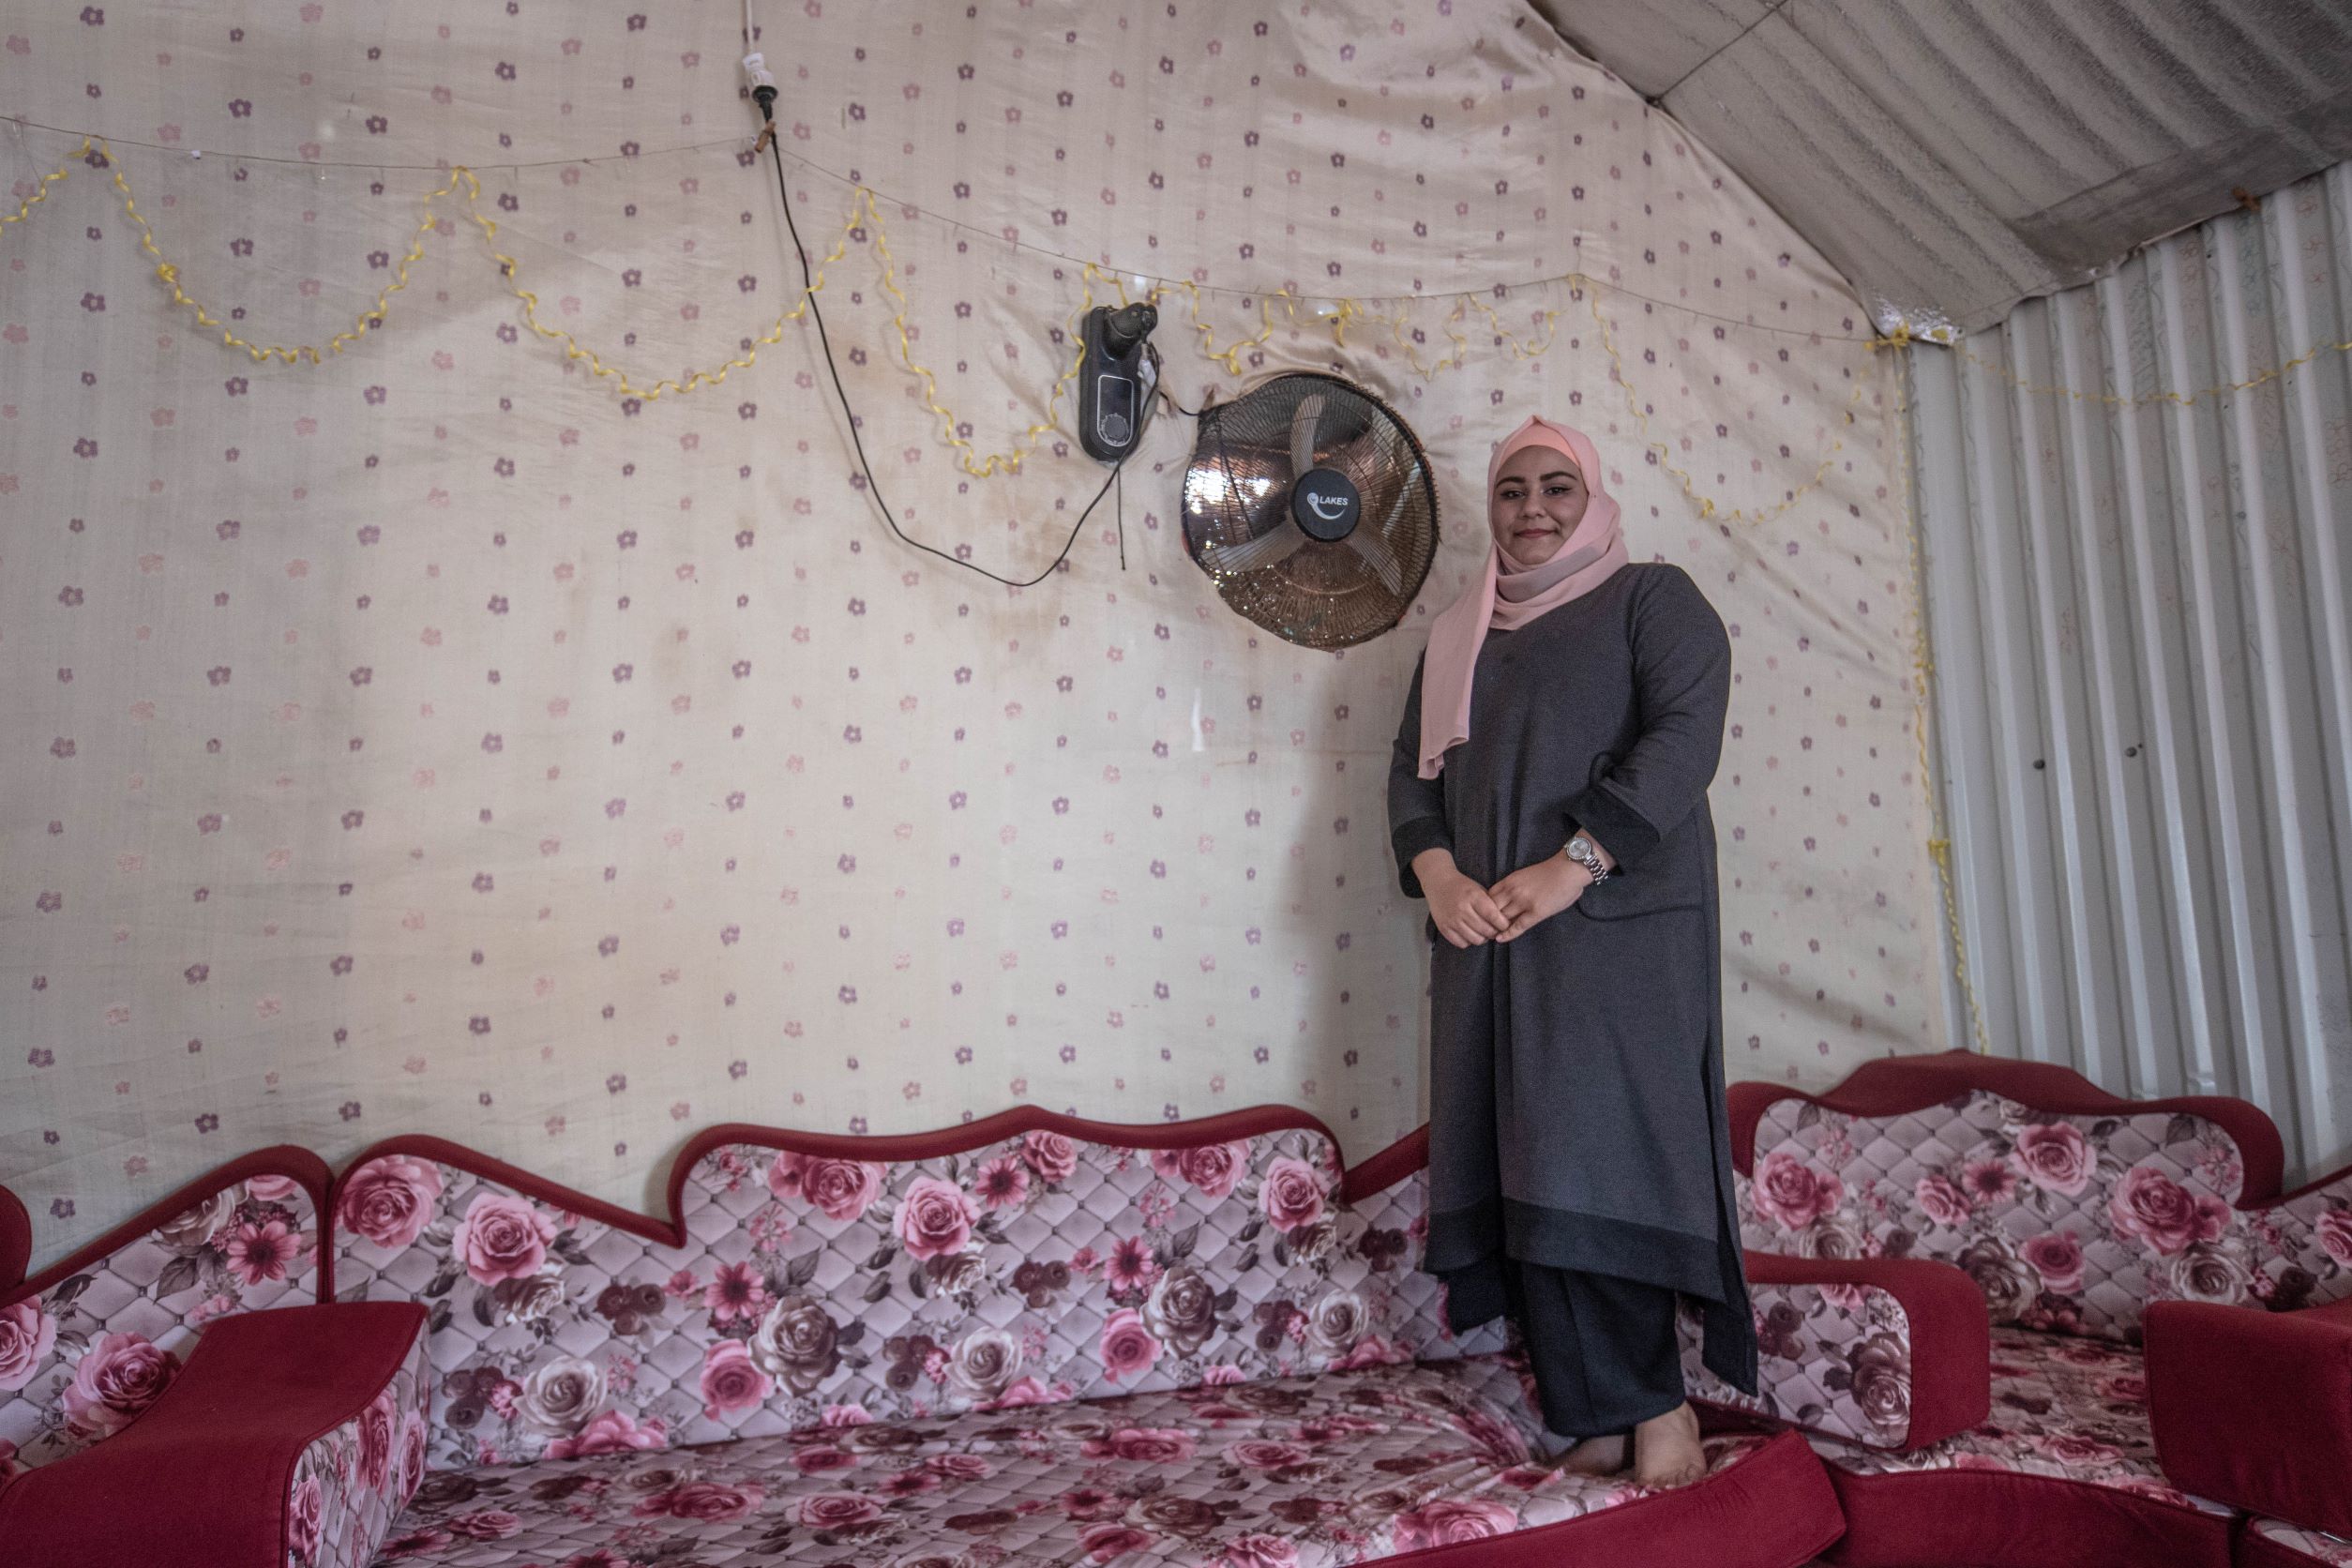 Nabiha, one of our participants, shows the air conditioning system her brother built in her living room, which works as follows: in summer, damp cloths are hung on the outside of the fan, which cool the air (up to 35°C) that is drawn into the room. However, in the part of the camp where Nabiha lives, there has been no electricity for weeks and the fan cannot be operated. Due to cuts in funding in the camp, there will be even less power supply in the near future.